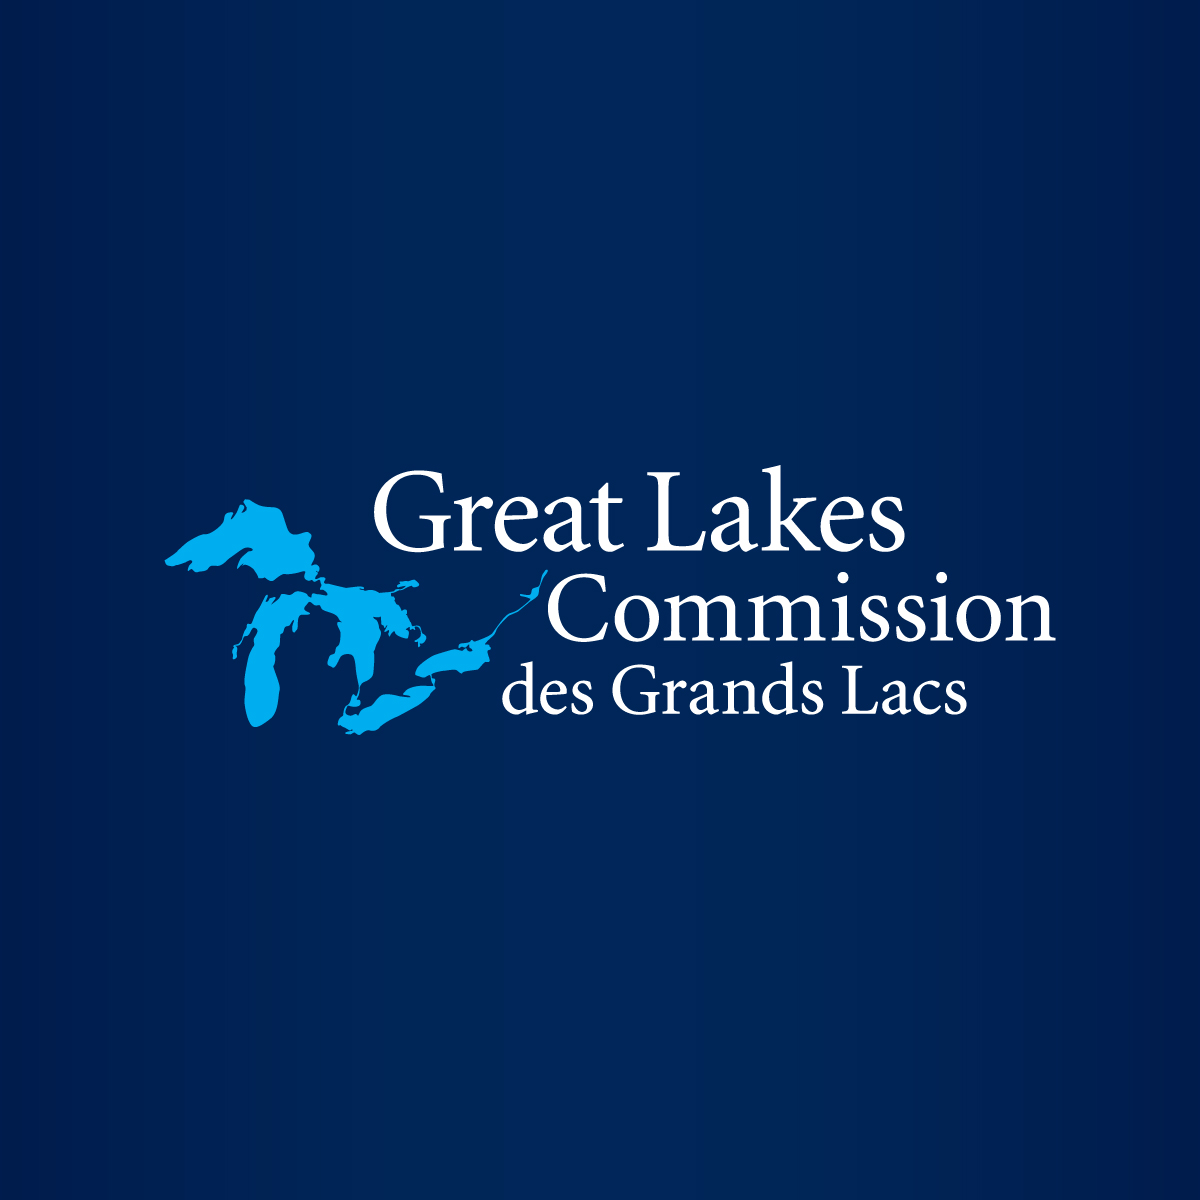 Great Lakes take global stage